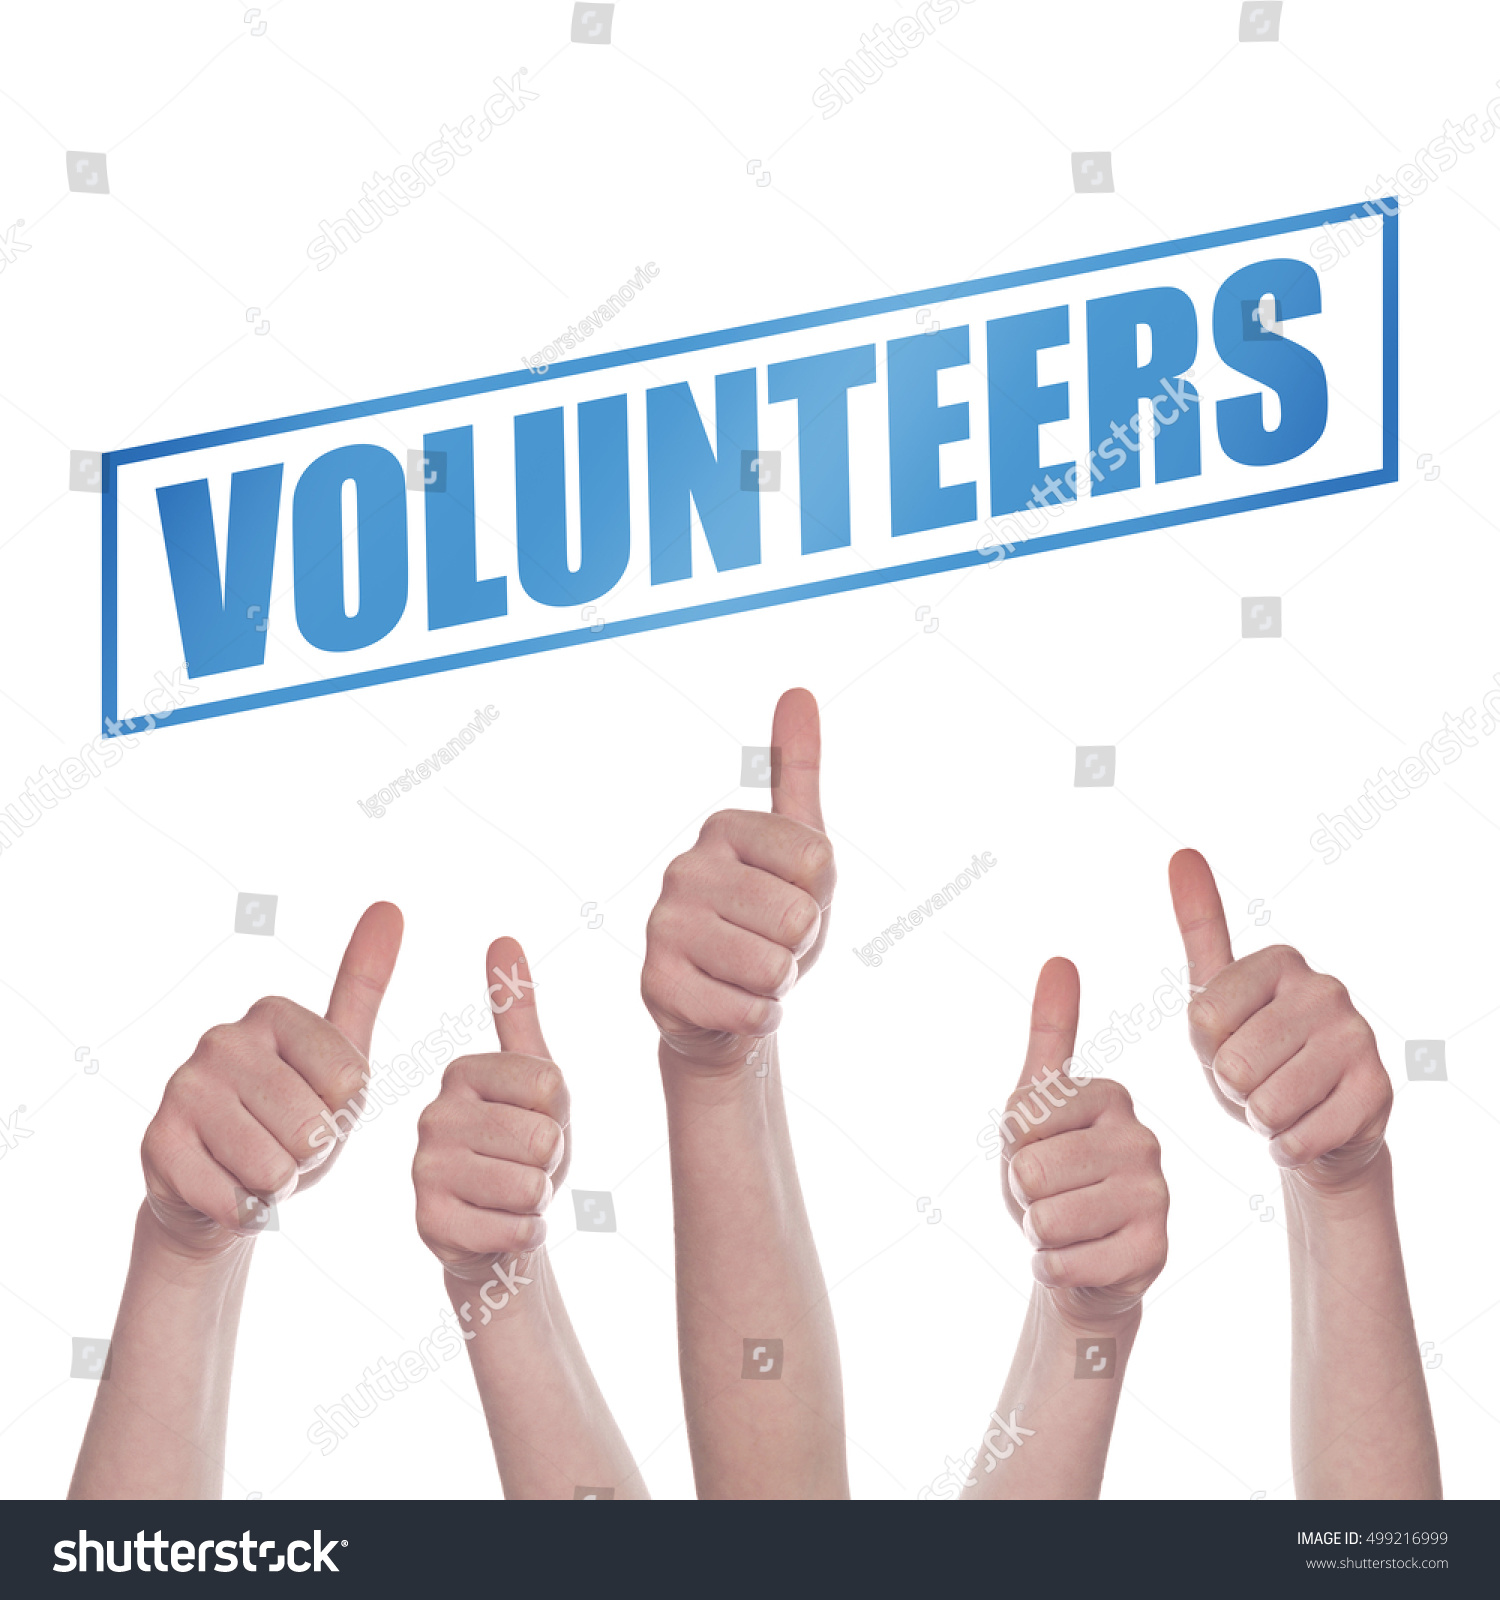 Thumbs up for volunteering concept, hands approving and supporting volunteers #499216999